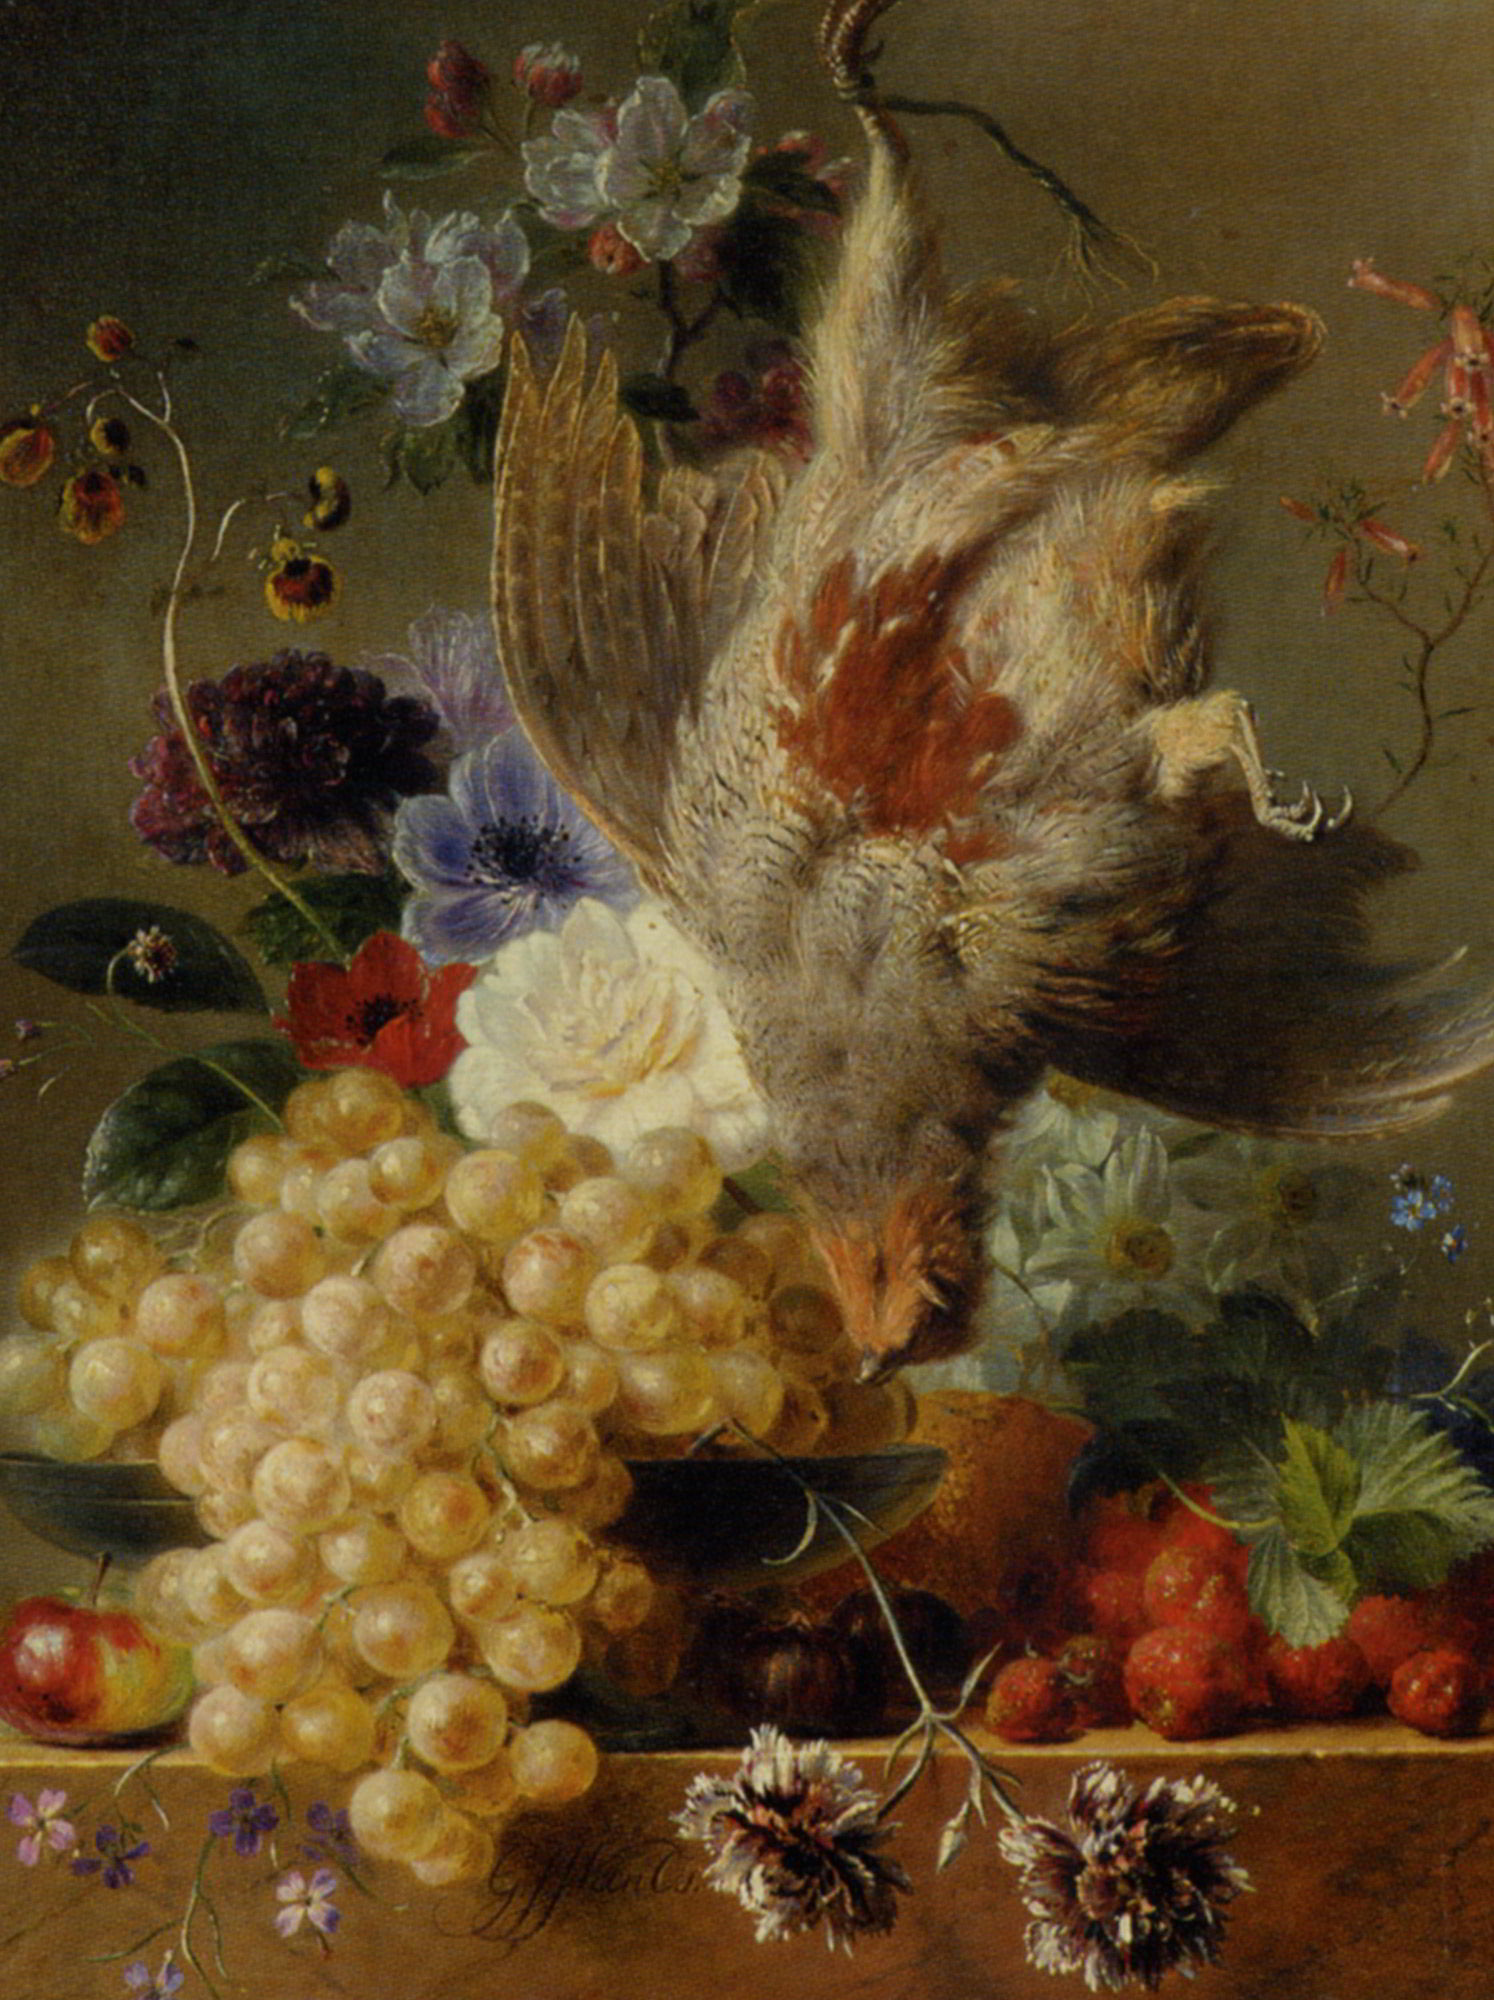 Grapes Strawberries Chestnuts an Apple and Spring Flowers by George Jacobus Johannes Van Os